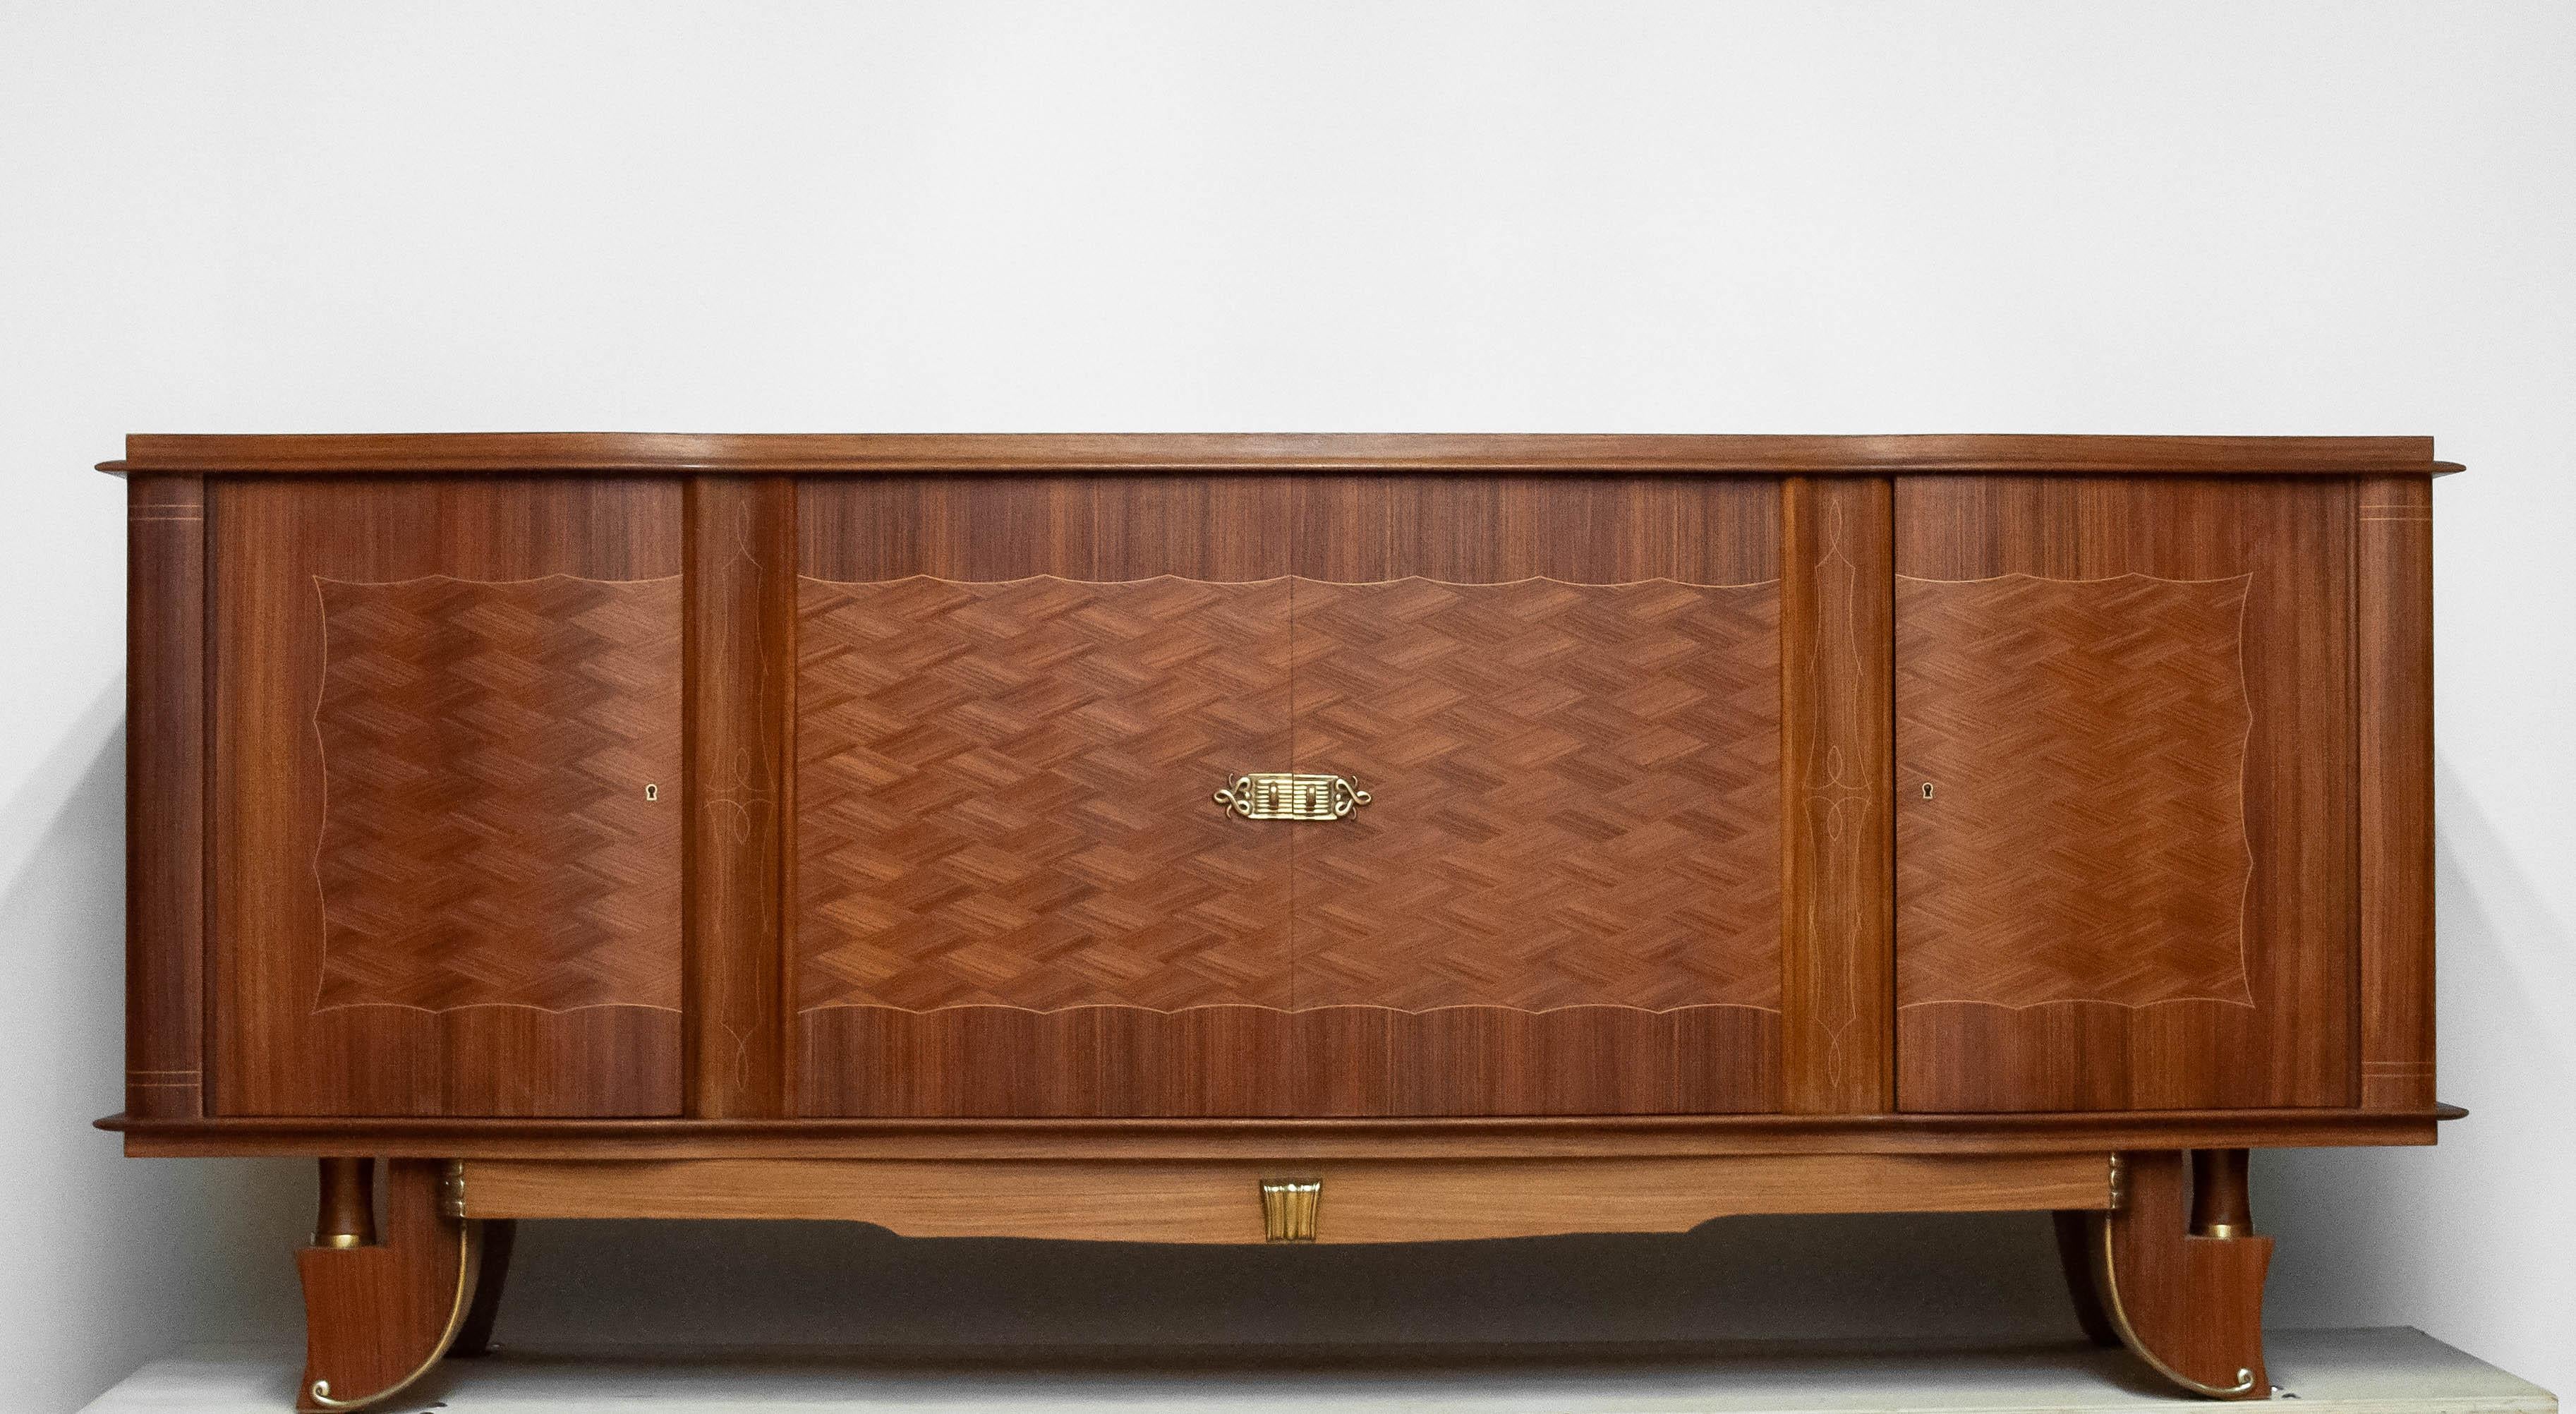 Beautiful quality product from the 1950s made in France by Jacques A. Gillen who had his workshop in Paris. Only the best quality wood has been used to complete this cabinet. The beautiful wooden inlay in the door panels makes this cabinet an